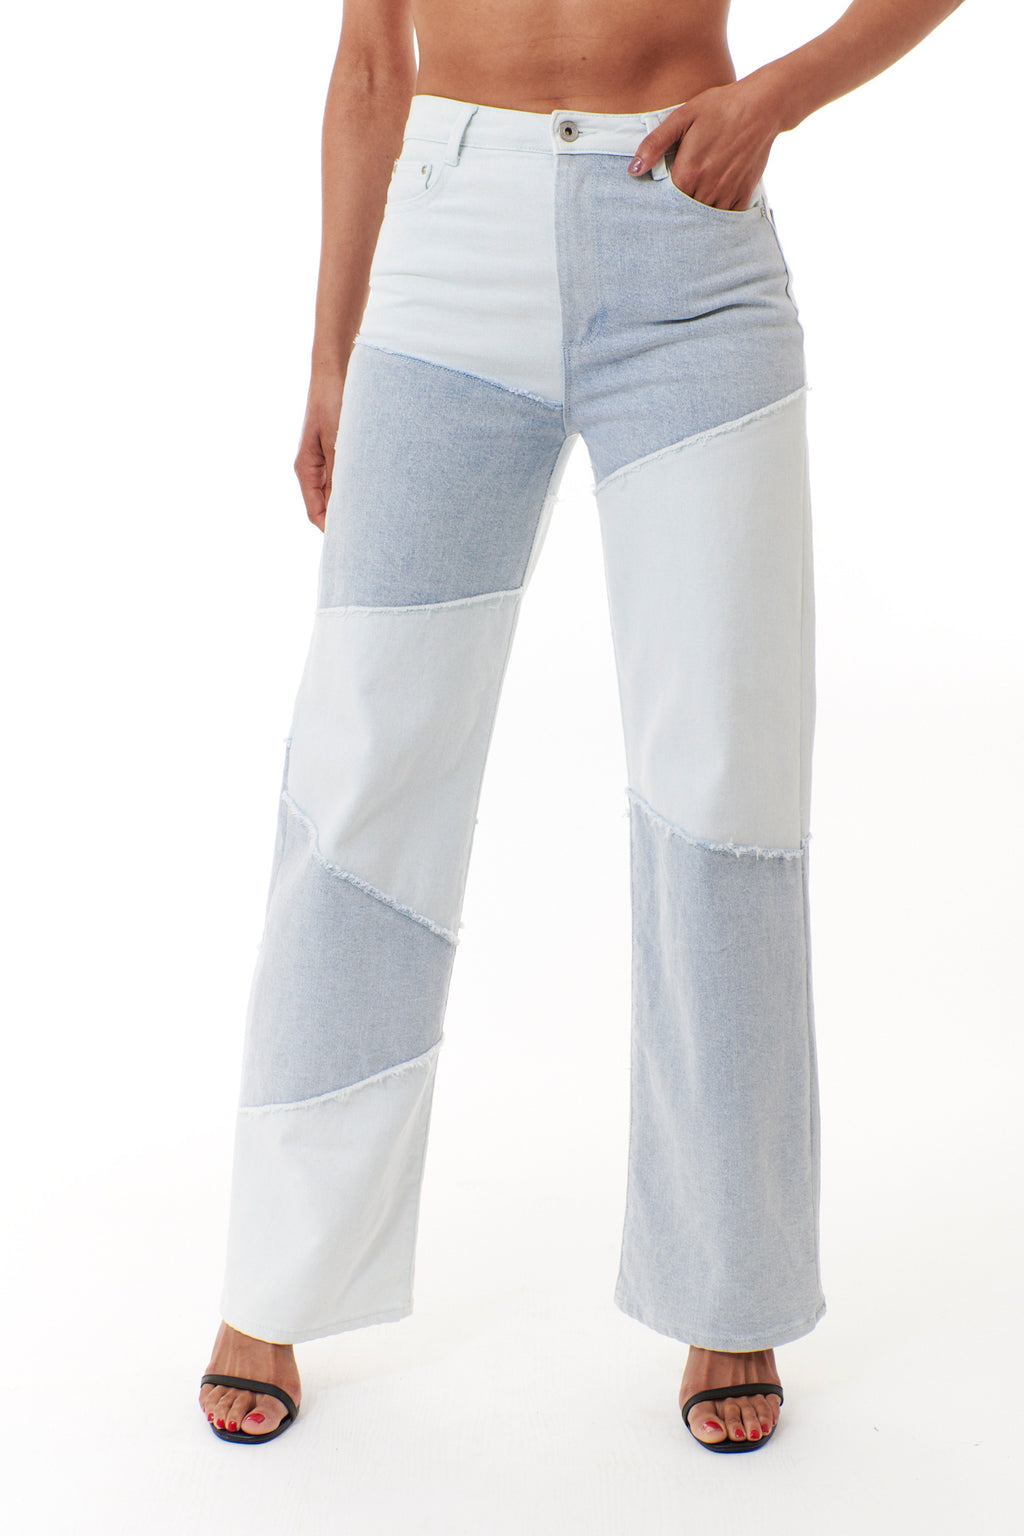 Tractr Jeans Tractr Jeans, Denim, high rise wide leg patchwork jean in  lightwash – Garbolino Boutique